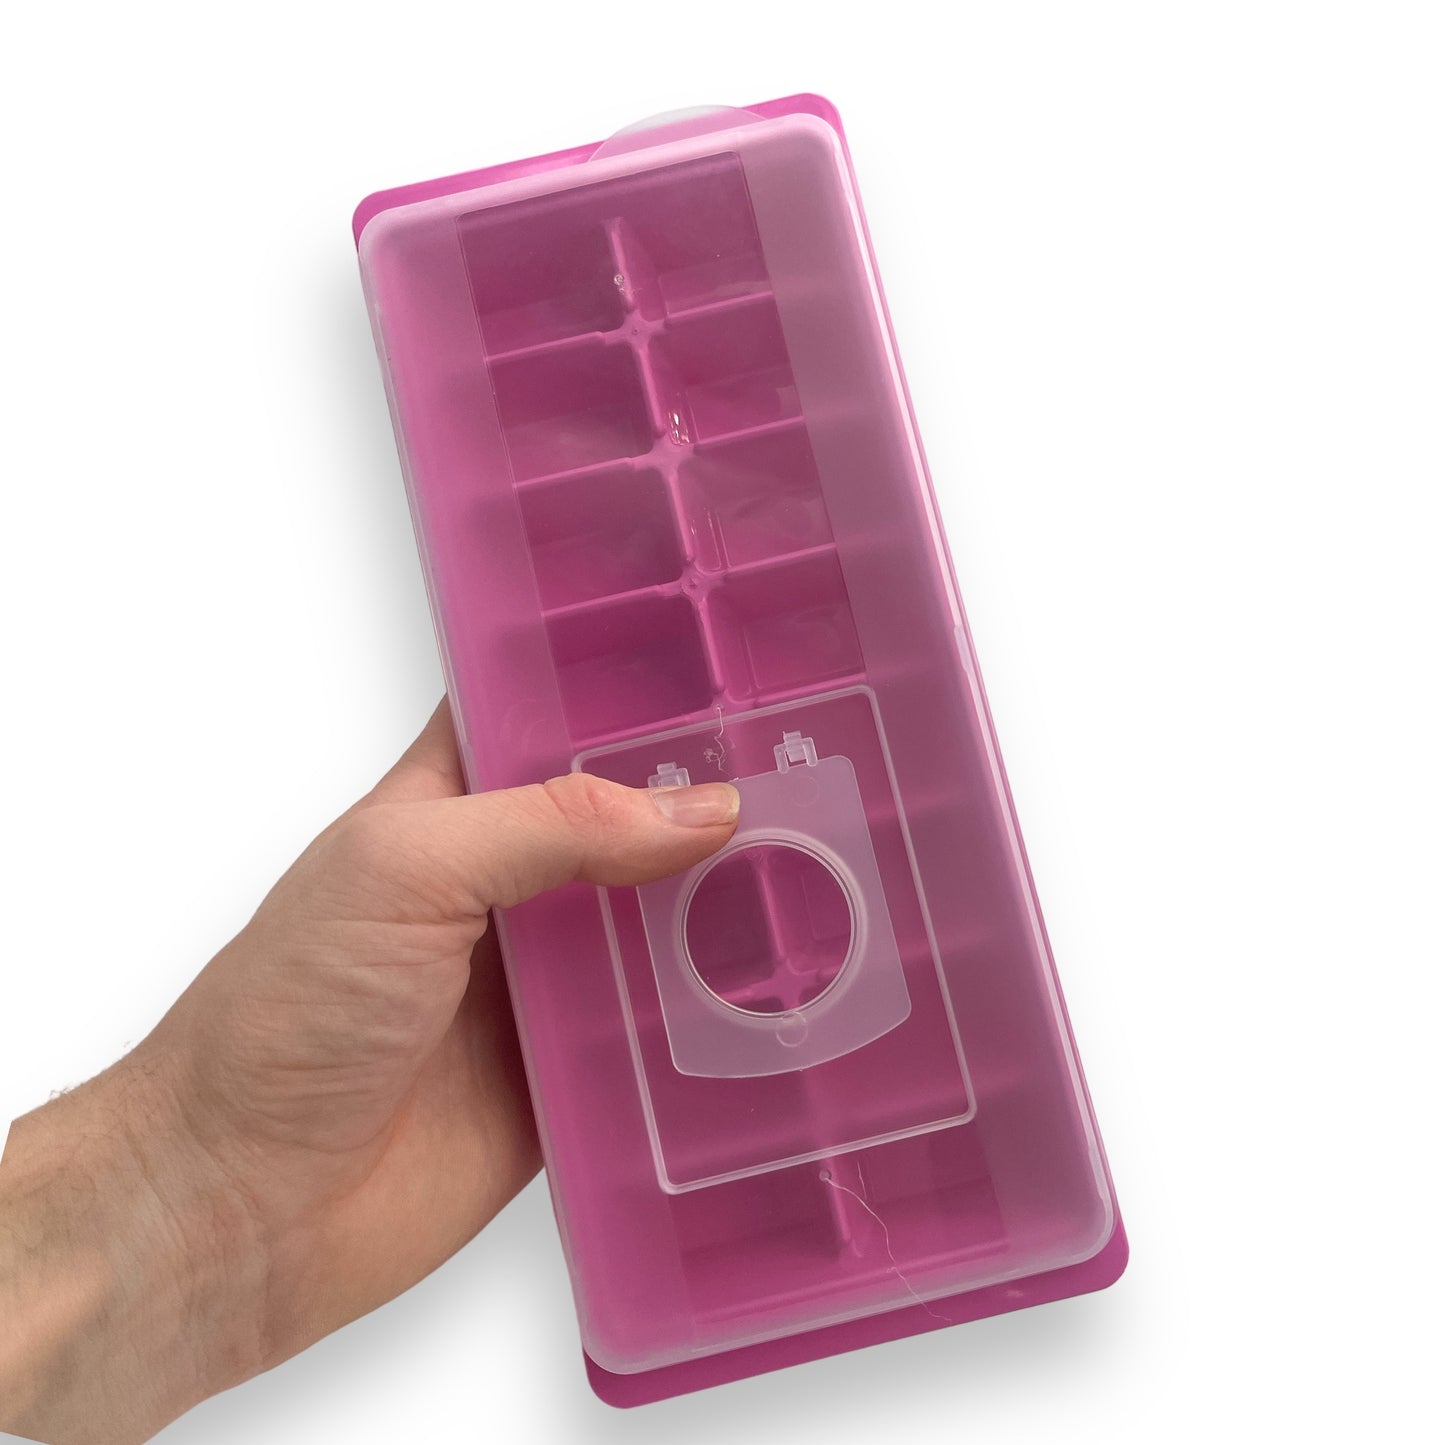 Ice cube maker 4 colors